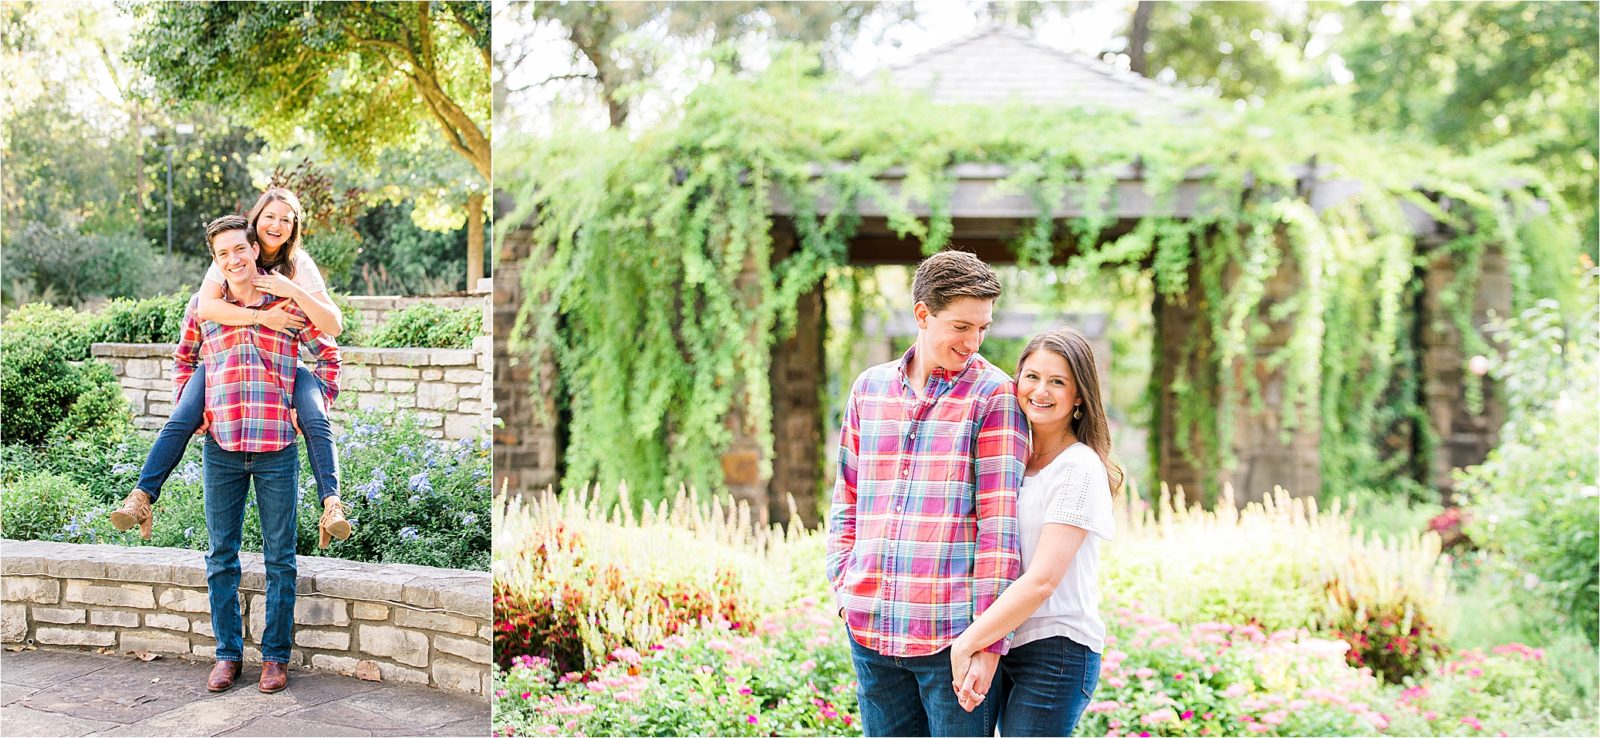 A bride to be hops on her fiance's back during their fall engagement session at The Fort Worth Botanic Garden by DFW Wedding Photographer Jillian Hogan 